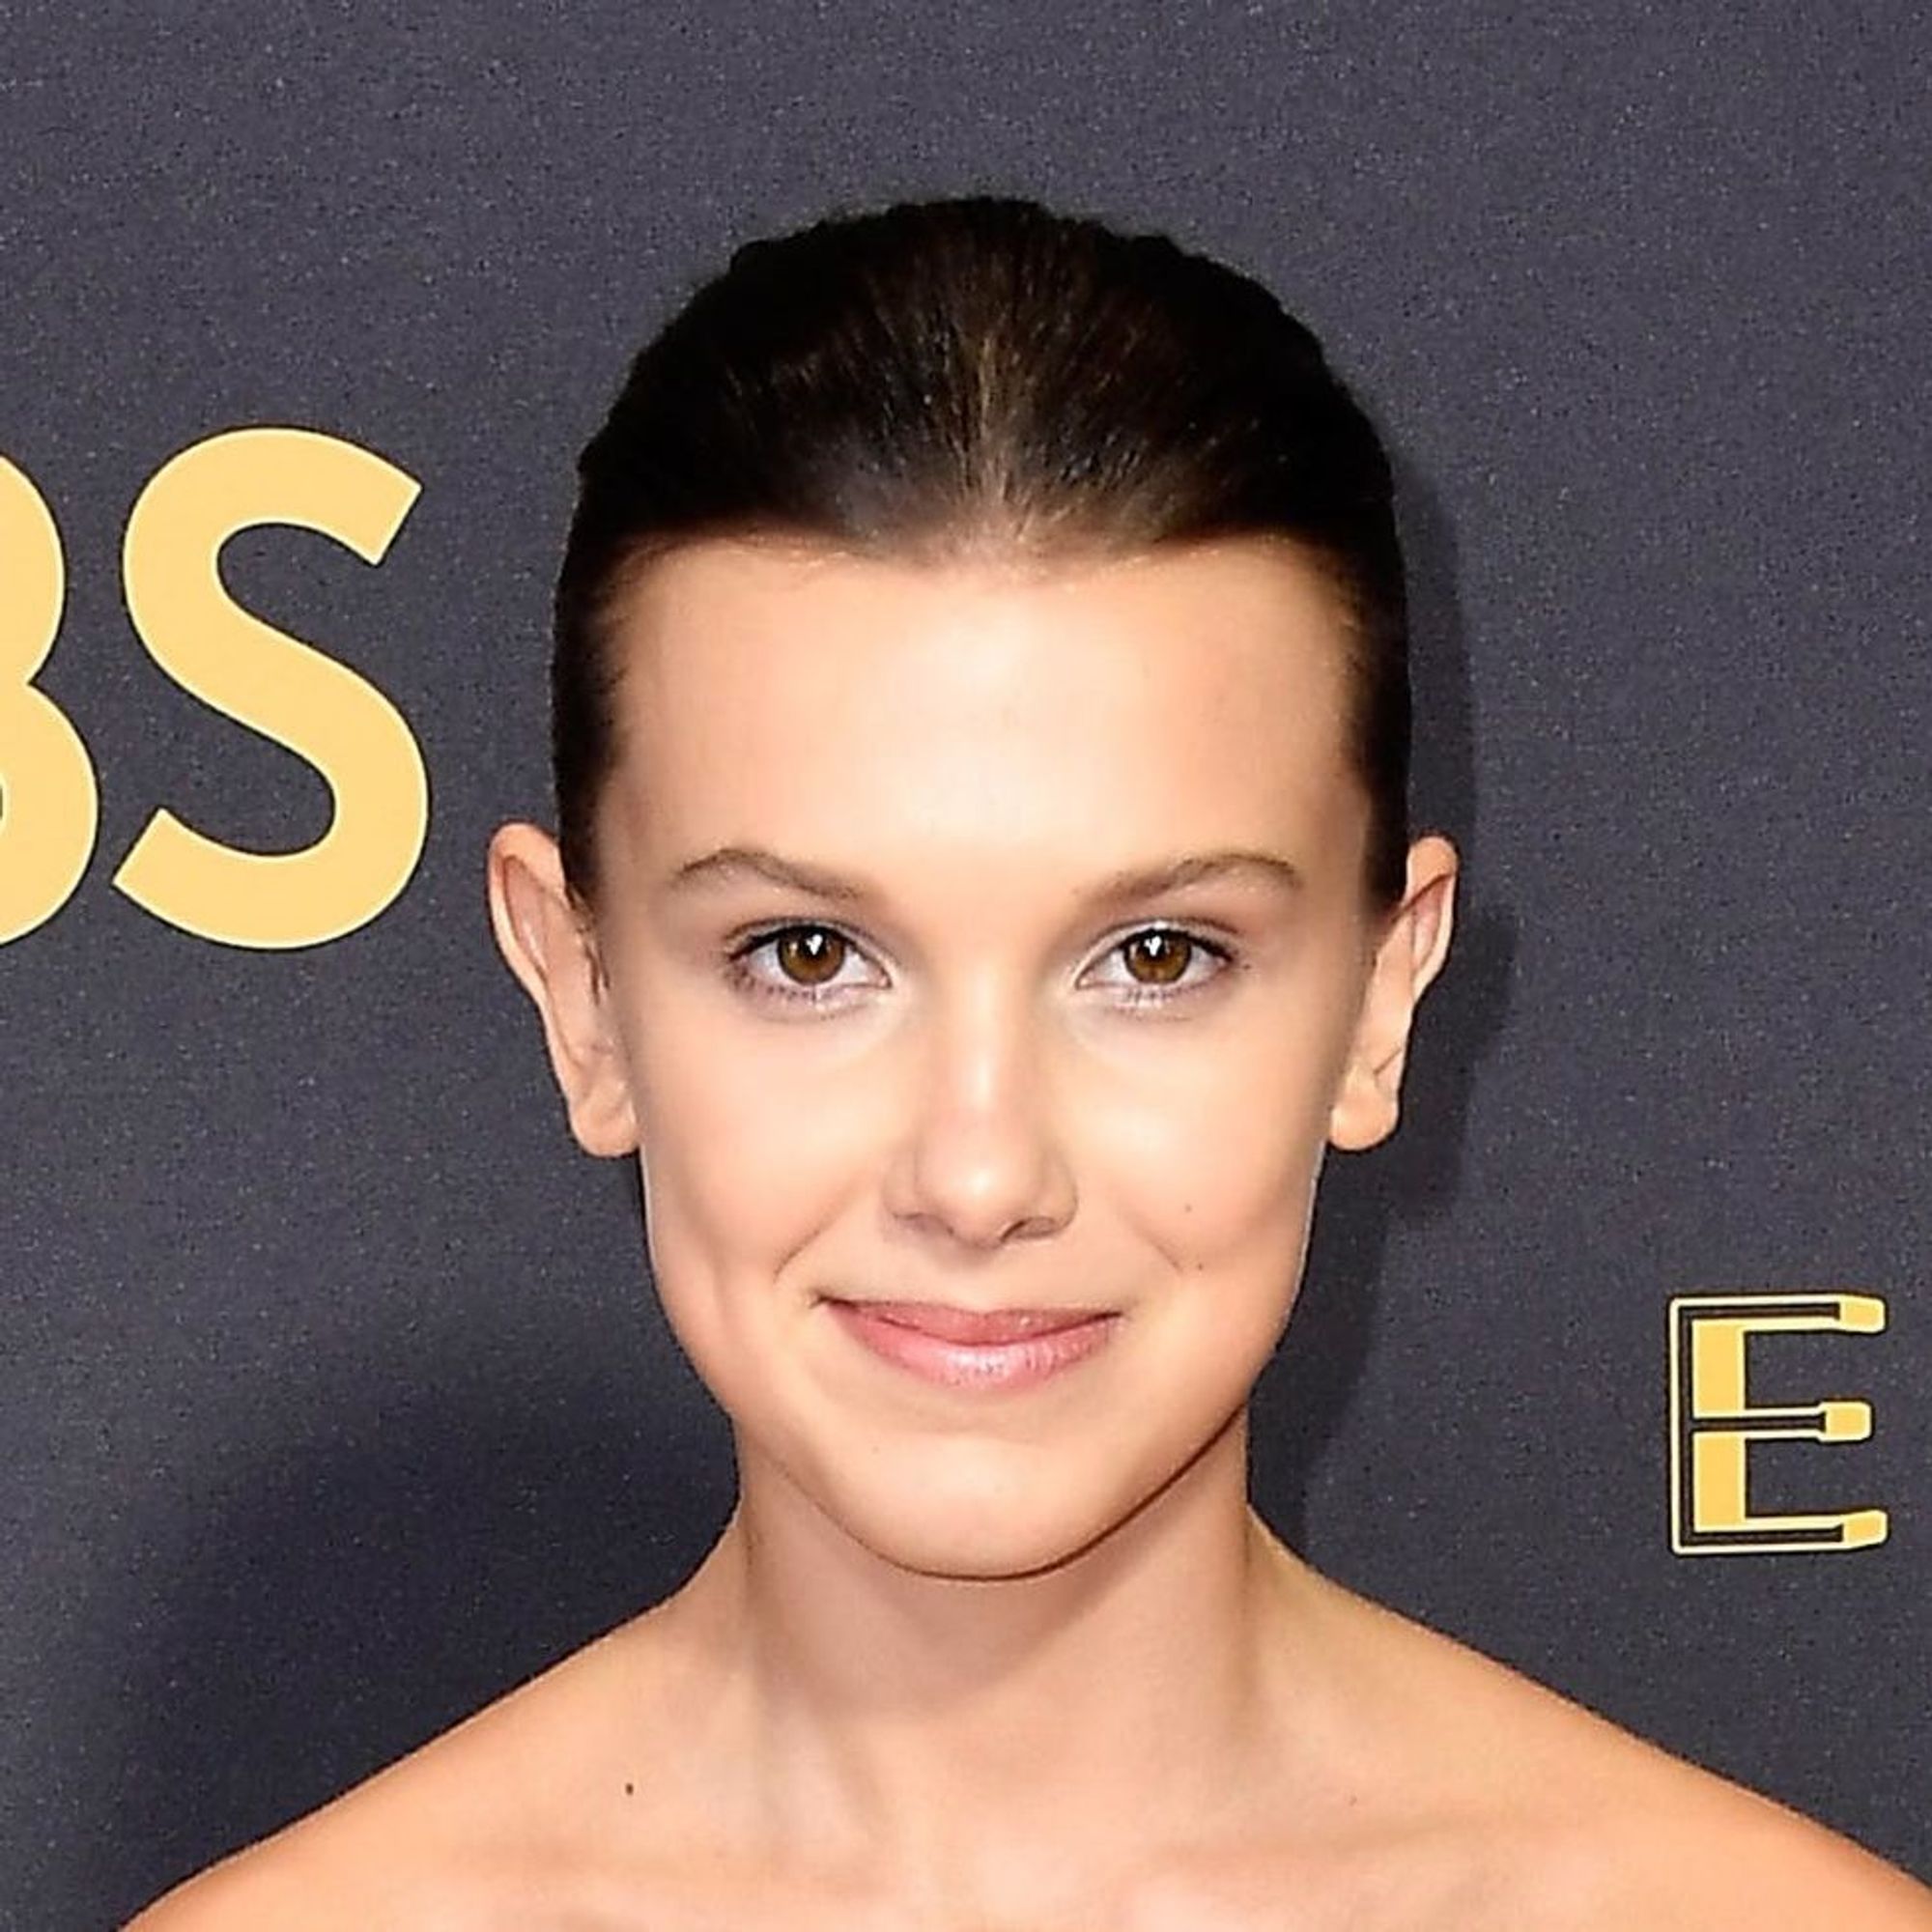 Millie Bobby Brown Just Debuted Long Hair on the Red Carpet and Our ...